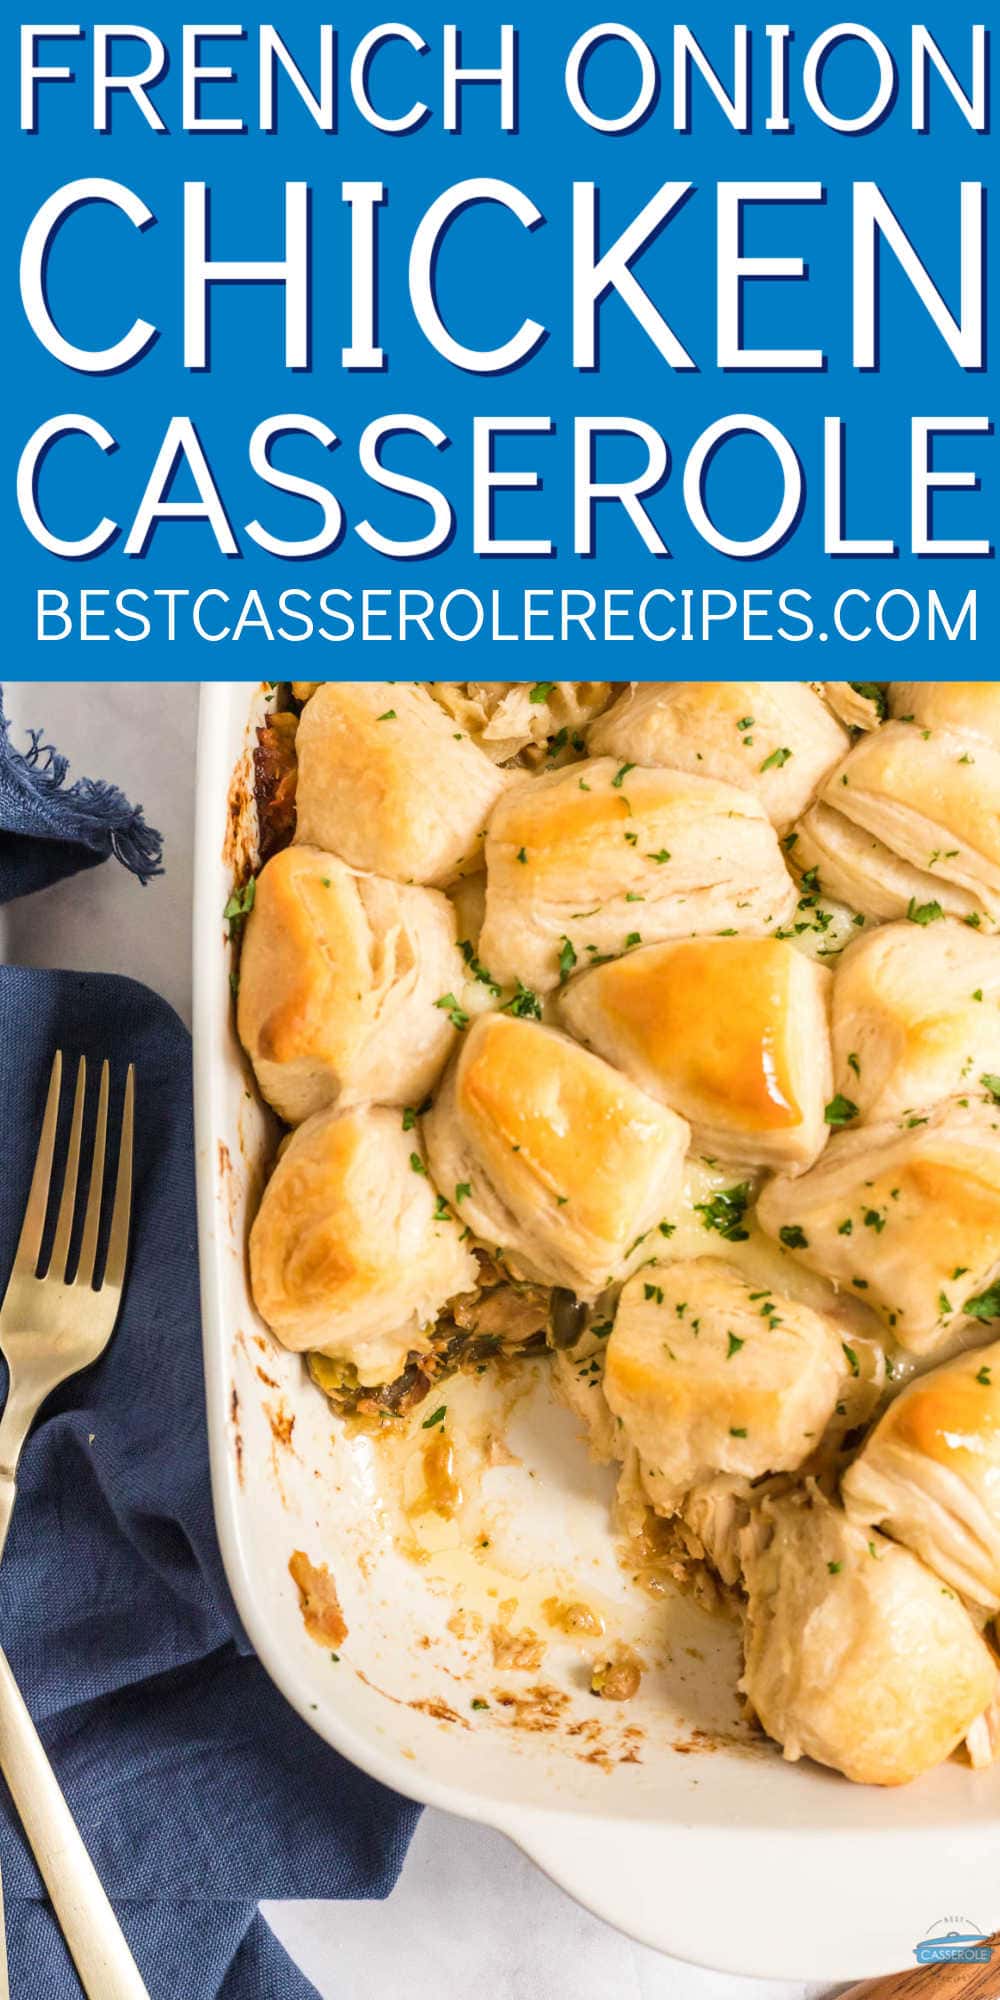 casserole with biscuits on top and a blue banner with text